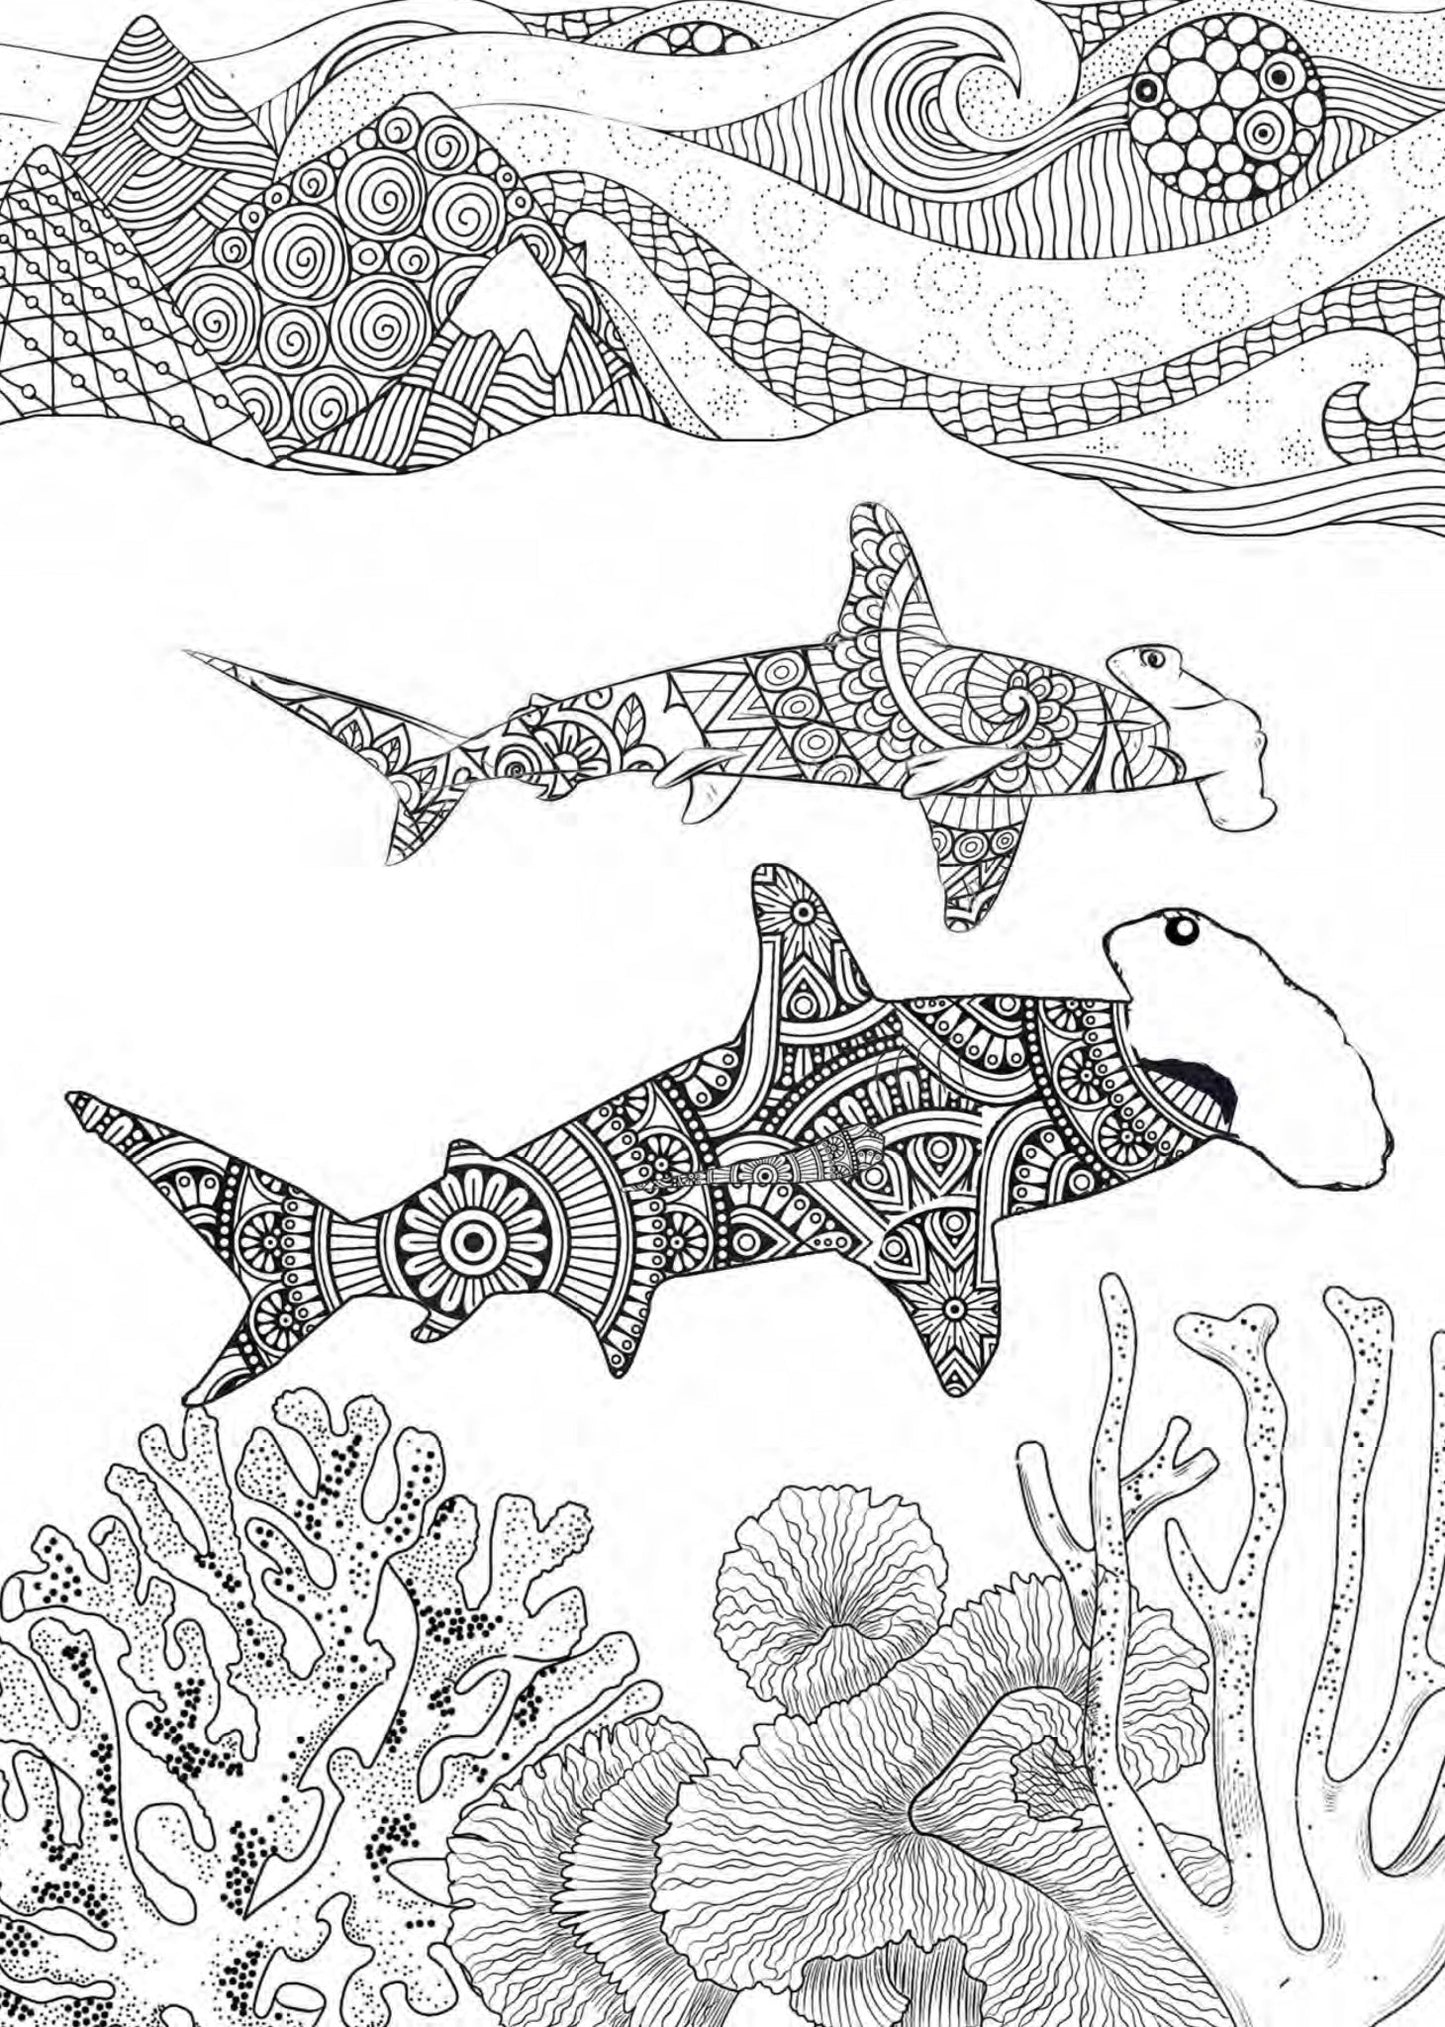 Wild Ocean Coloring Book for Adults (Printbook) - Monsoon Publishing USA